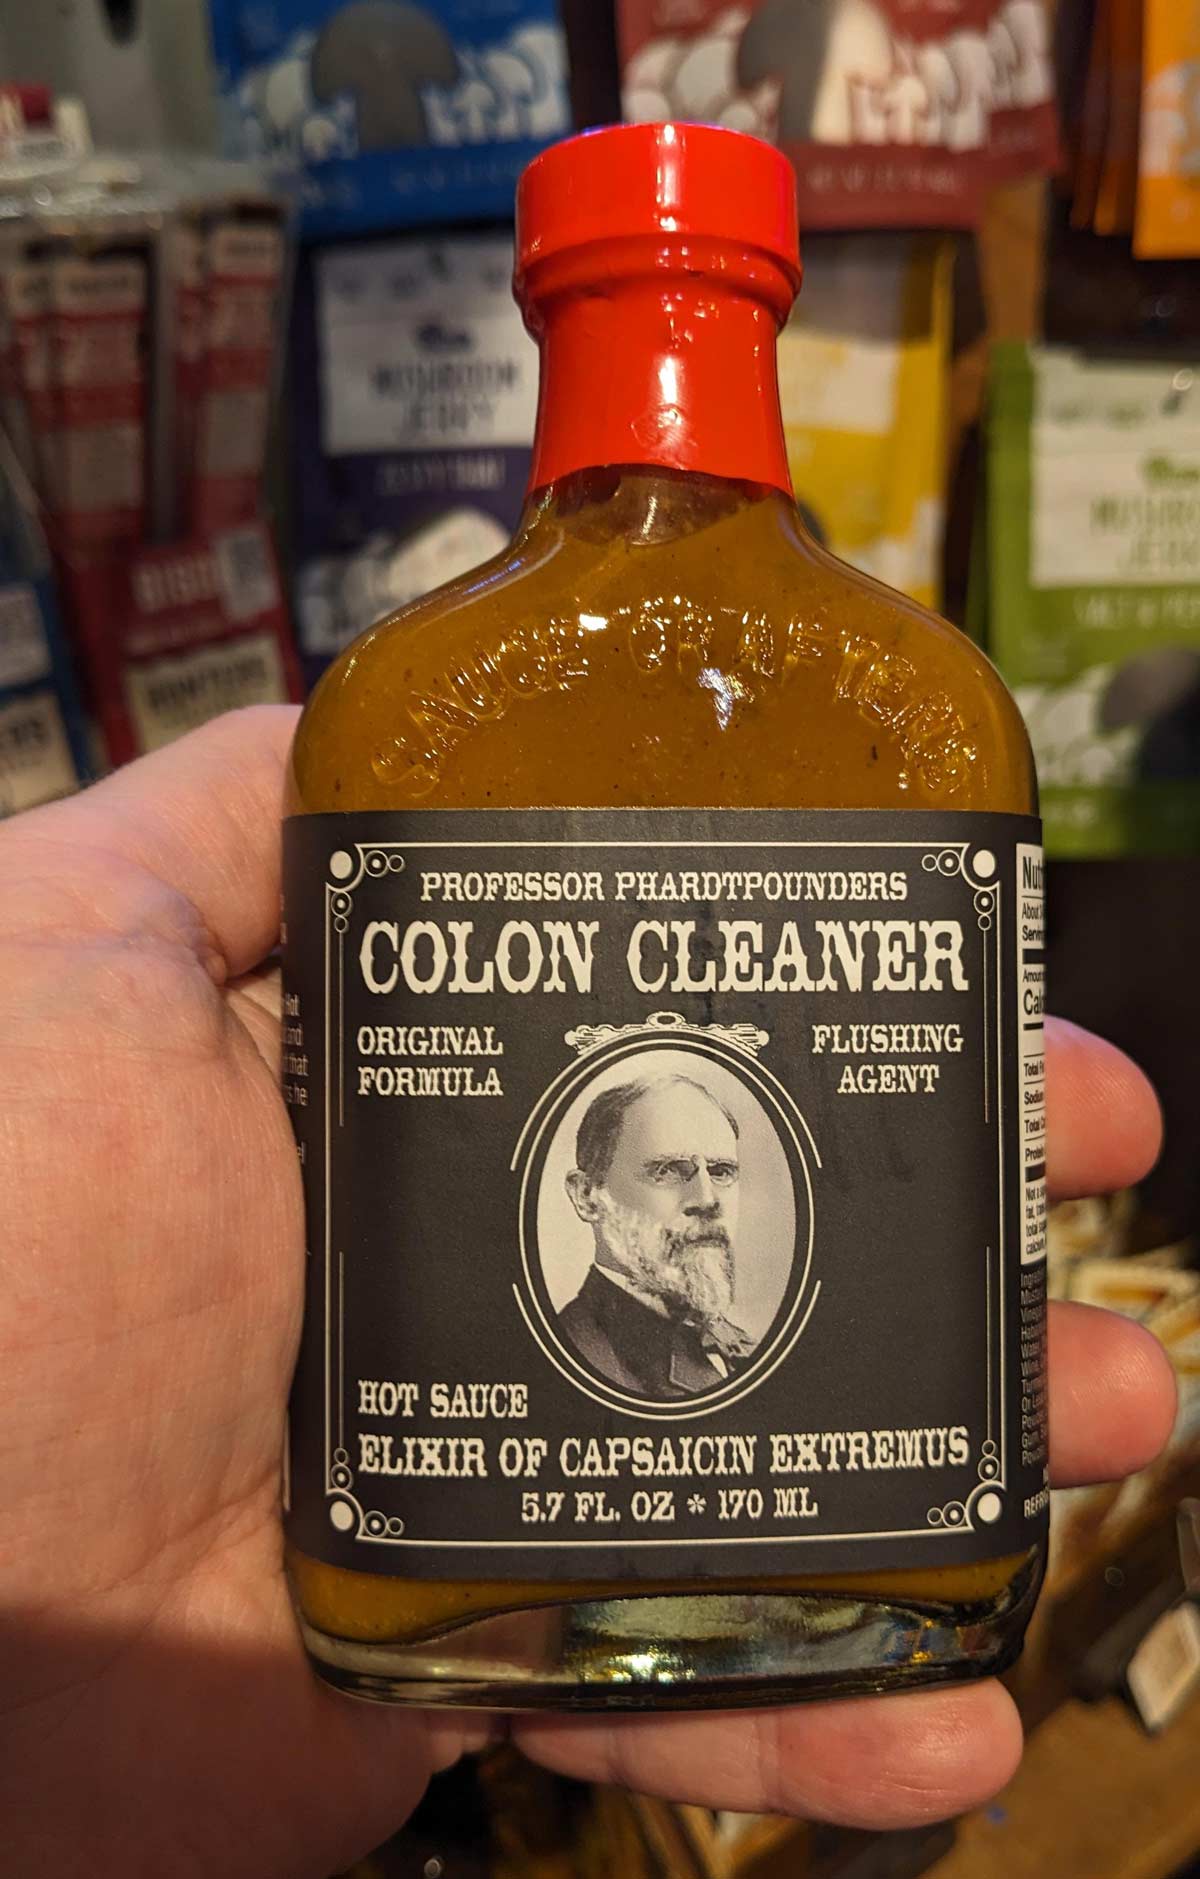 Found this hot sauce in a shop in southern California